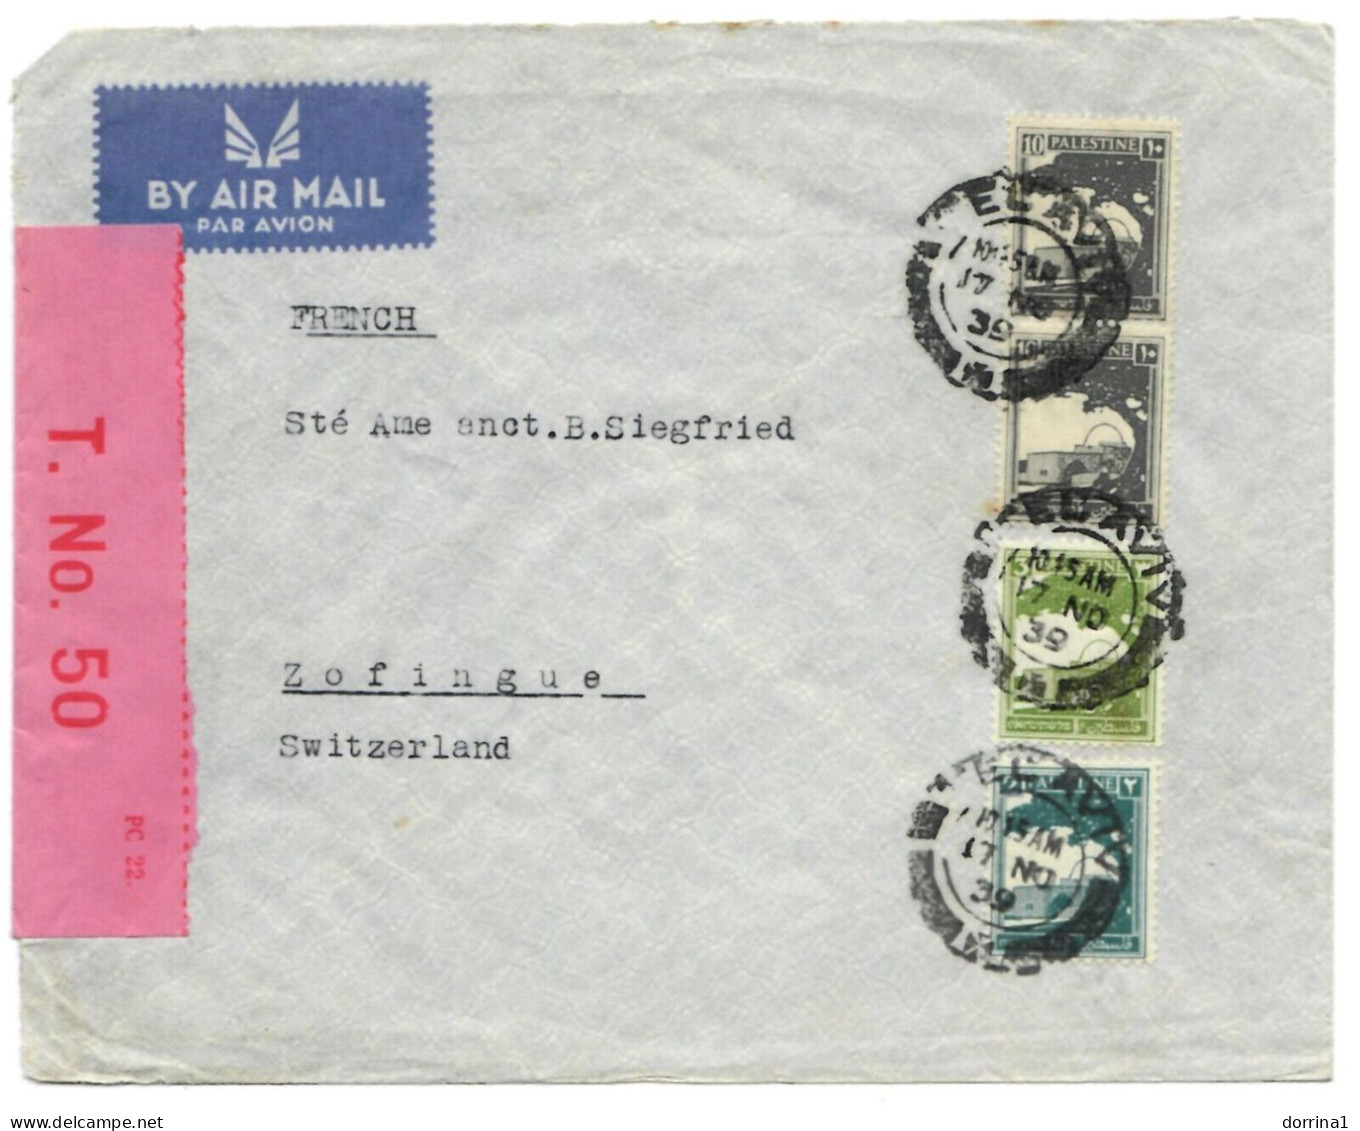 WWII 1939 Cover Tel Aviv Palestine Mandate Open By Censor T No 50 AirMail - Palestina